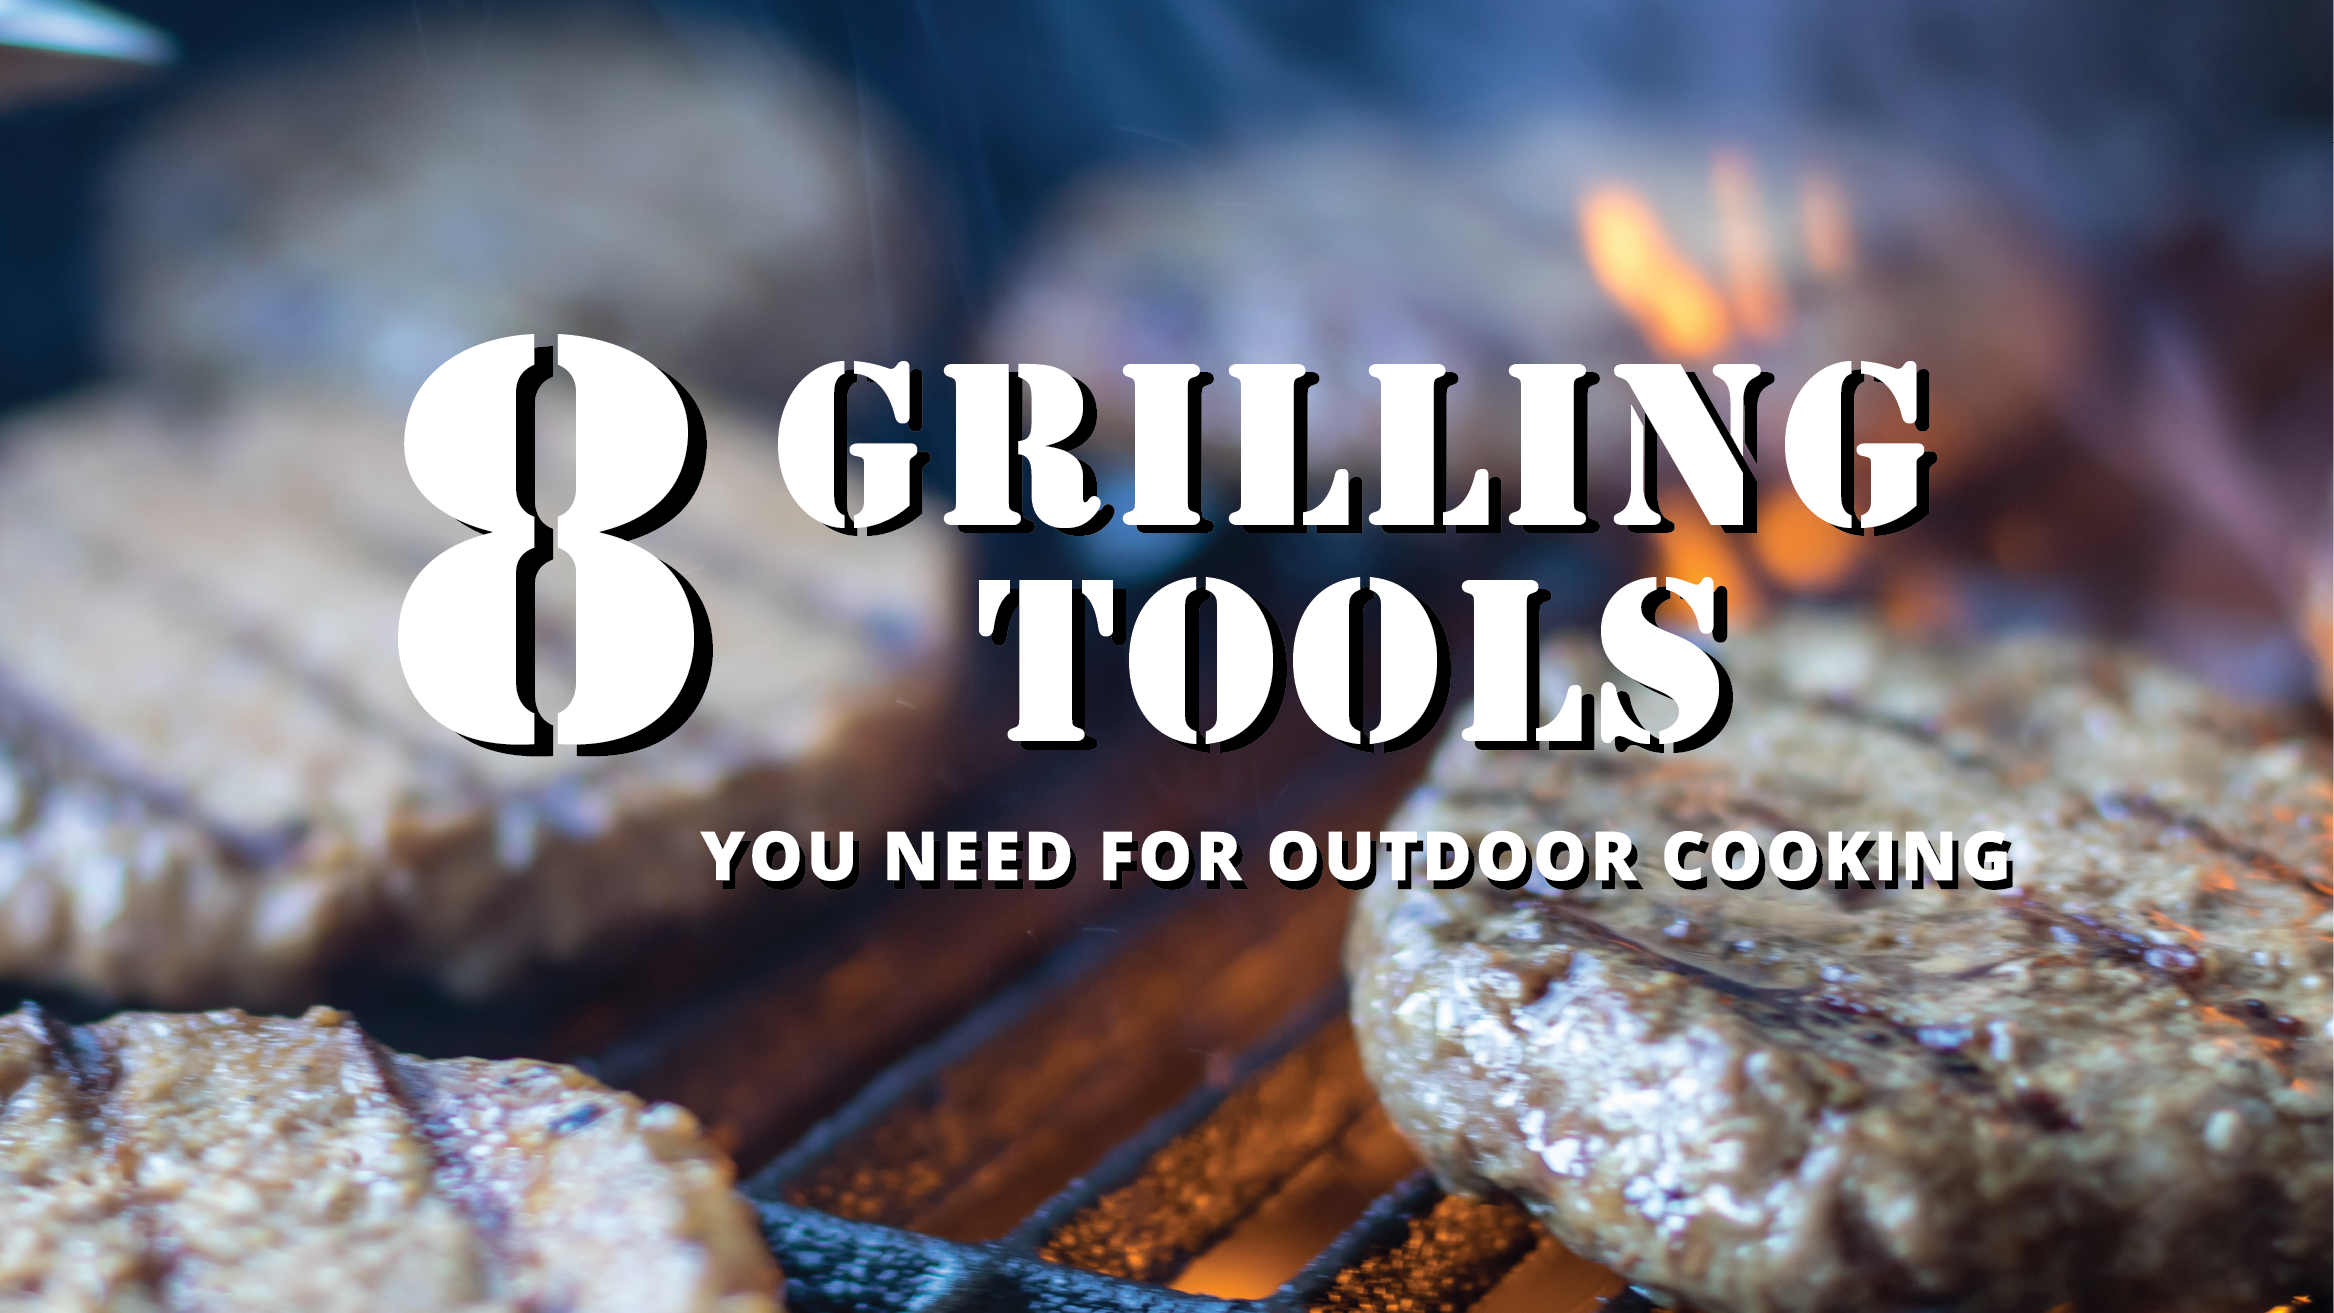 The best outdoor cooking equipment for the ultimate barbecue